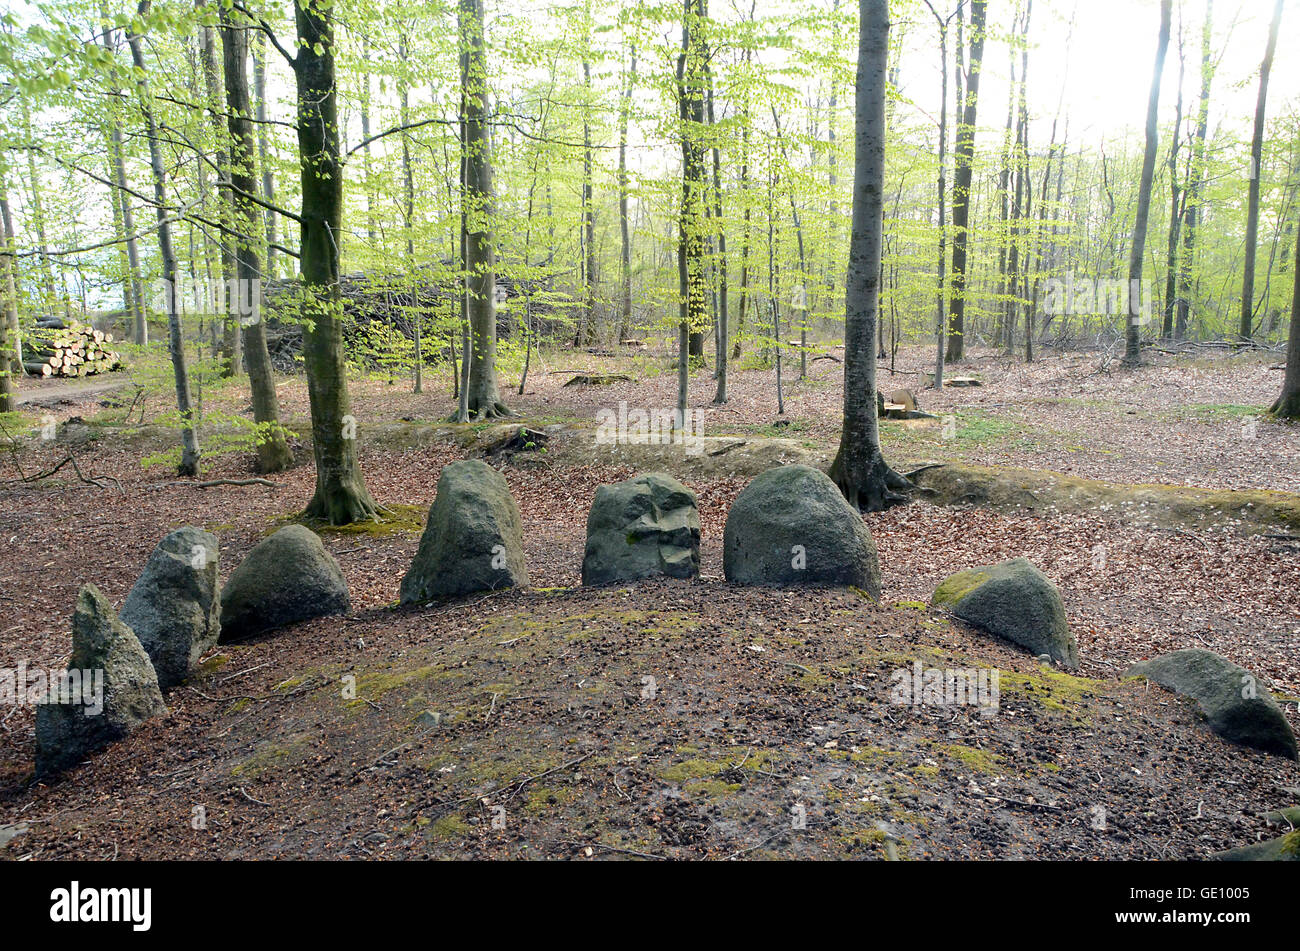 The Bronze Age grave mounds at Blomeskobbel in Denmark. They hide deep in the forest but appear in good condition. Stock Photo